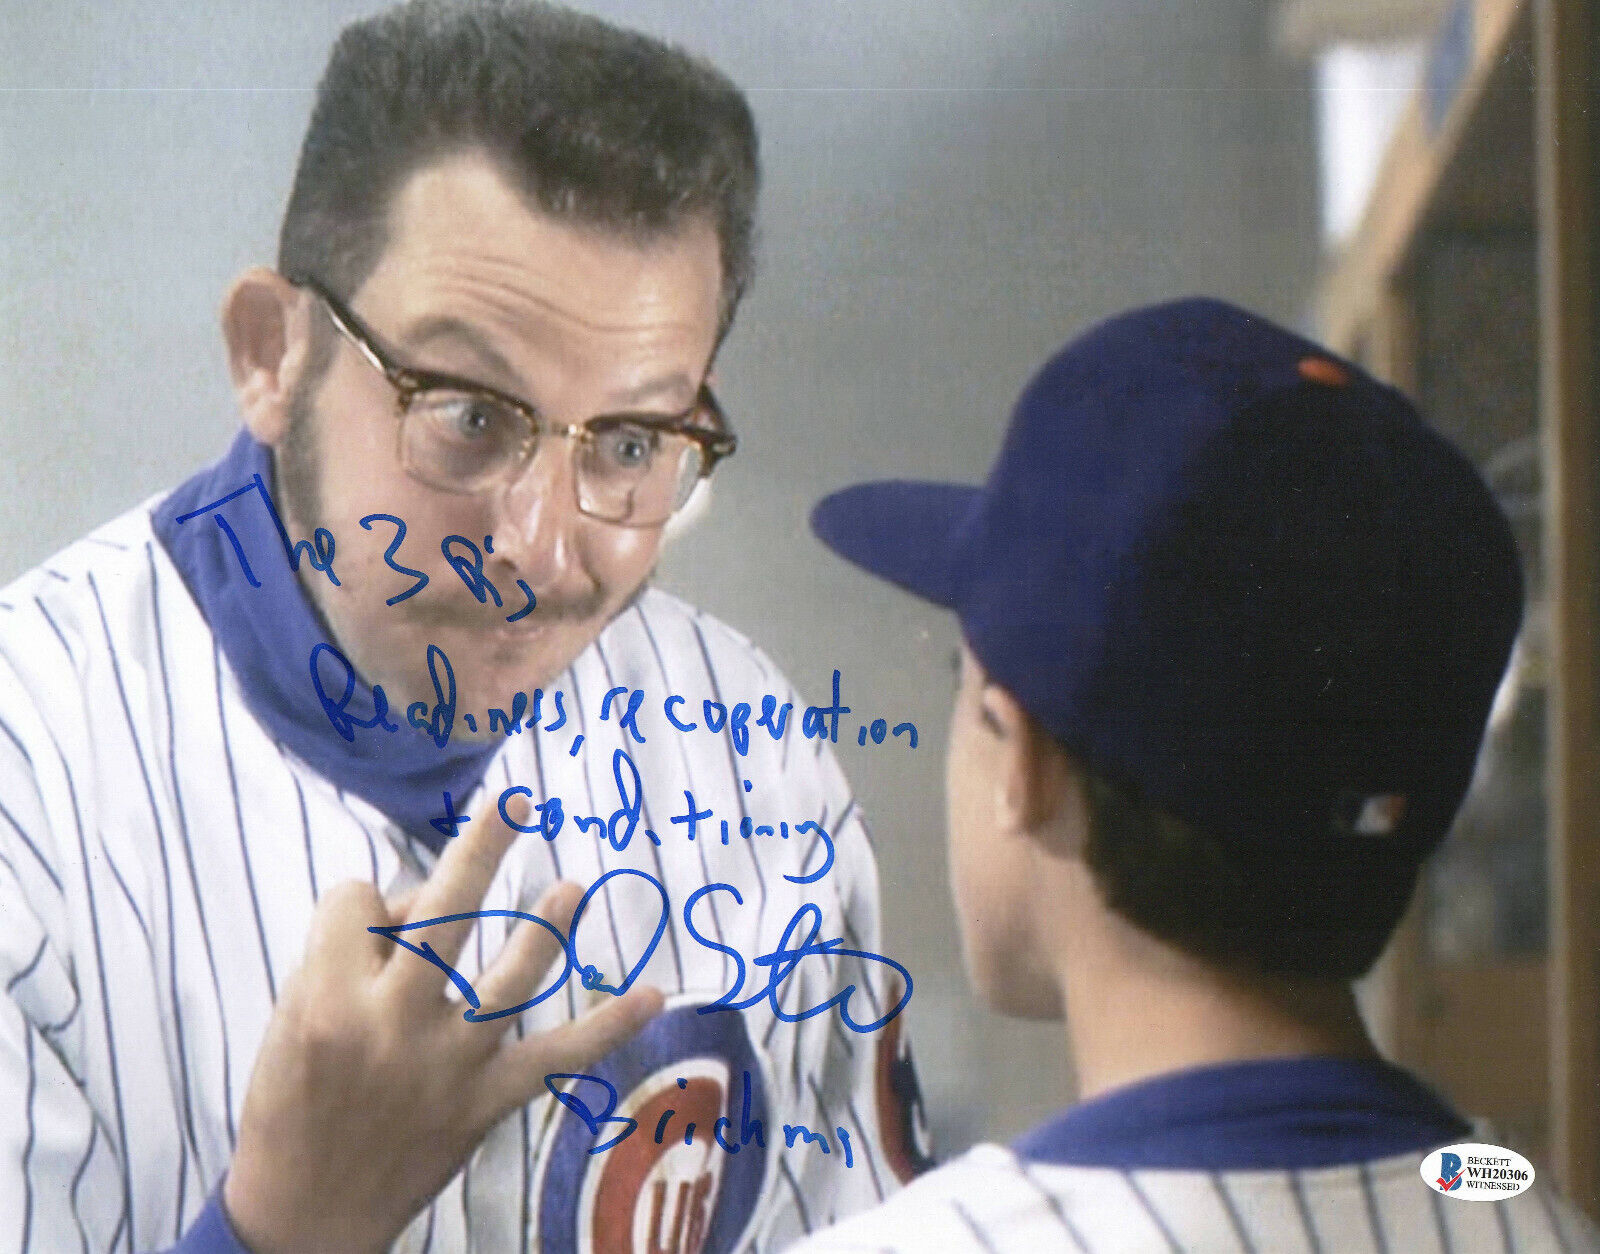 DANIEL STERN SIGNED AUTOGRAPH 'ROOKIE OF THE YEAR' 11X14 PHOTO BECKETT BAS 59